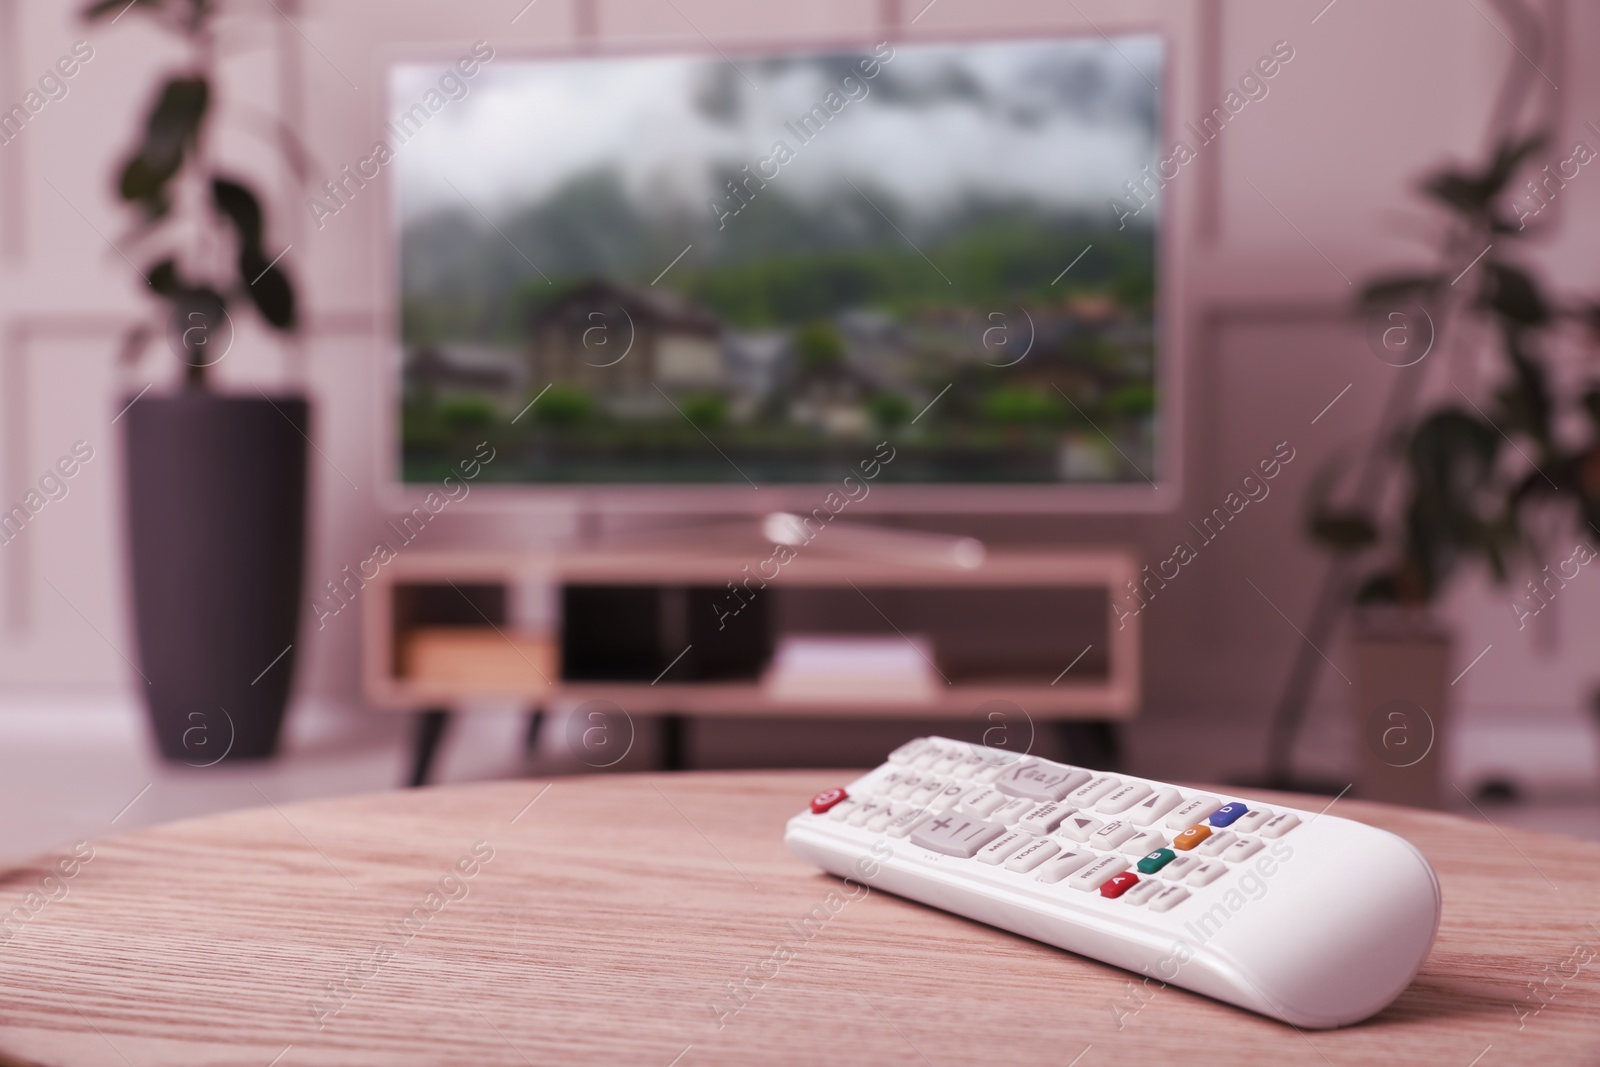 Image of Remote control on wooden table and TV screen in room, selective focus